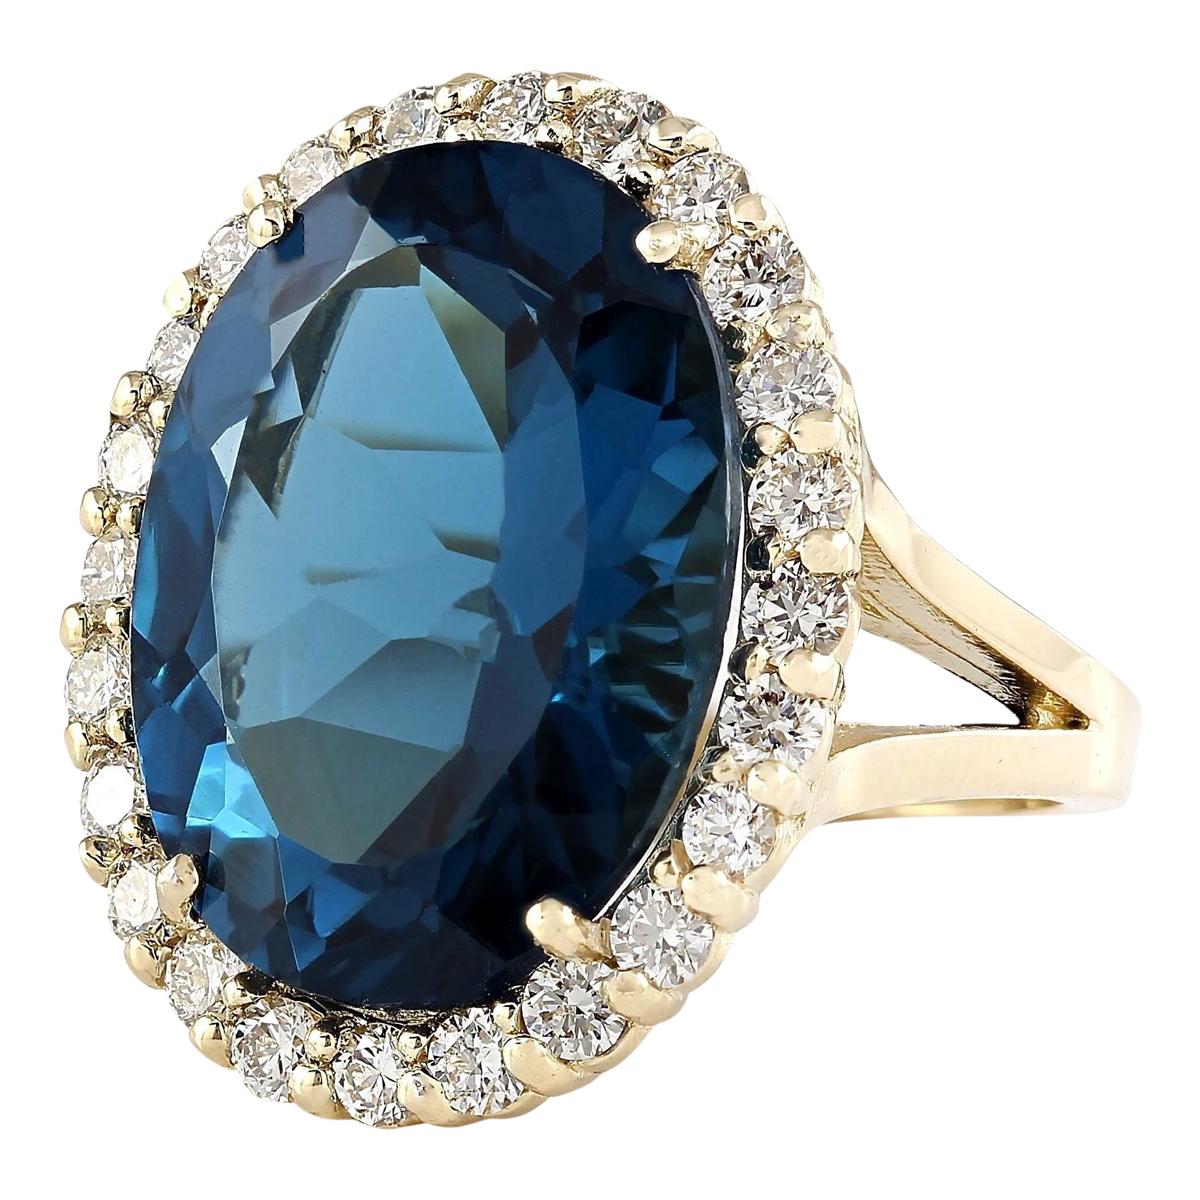 21.20 Carat Natural Topaz 14 Karat Yellow Gold Diamond Ring
Stamped: 14K Yellow Gold
Total Ring Weight: 8.1 Grams
Total Natural Topaz Weight is 19.90 Carat (Measures: 20.00x15.00 mm)
Color: London Blue
Total Natural Diamond Weight is 1.30